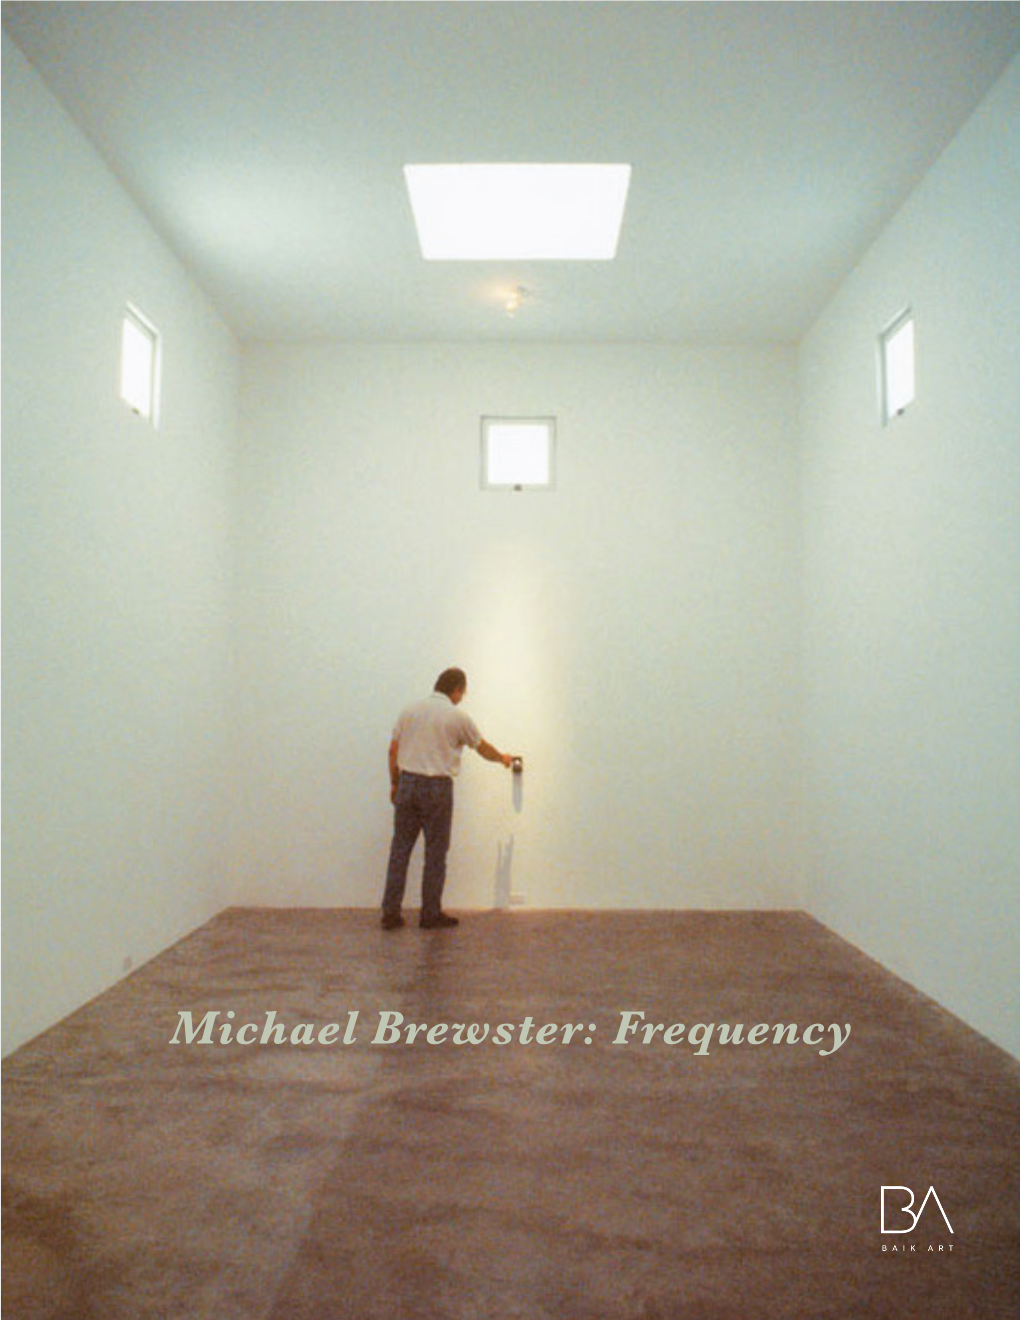 Michael Brewster: Frequency